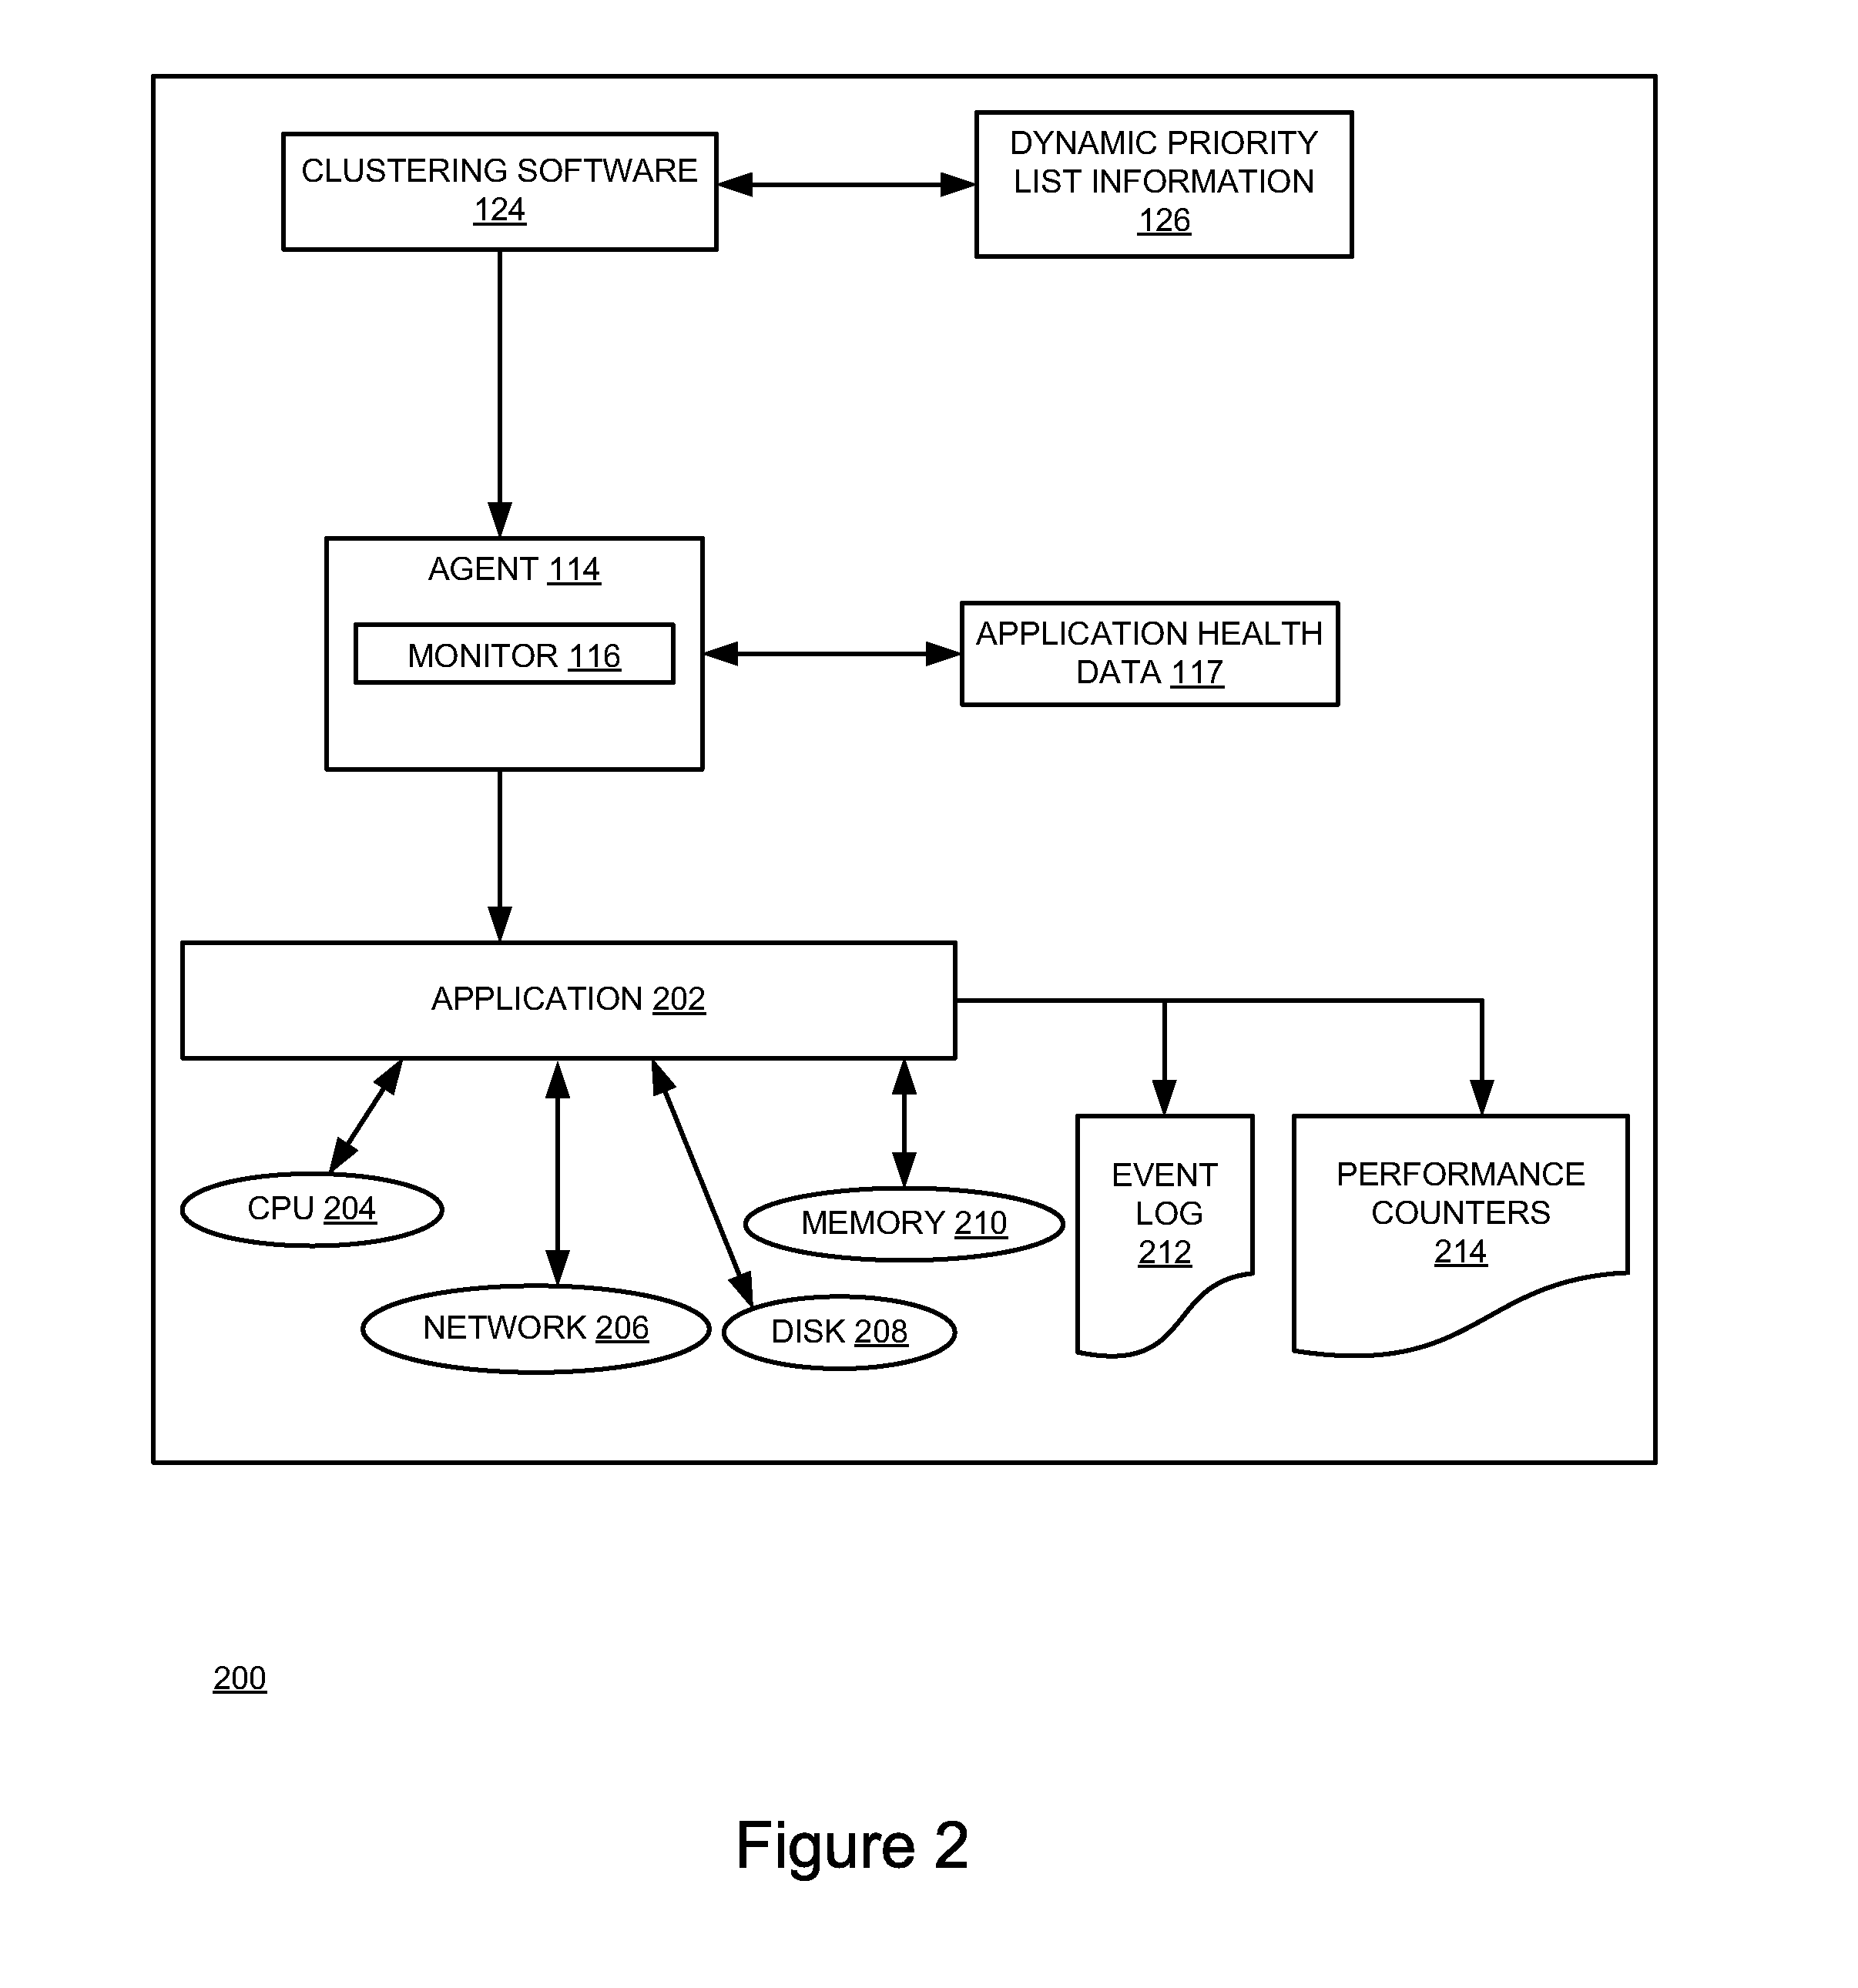 Method and apparatus for proactively monitoring application health data to achieve workload management and high availability